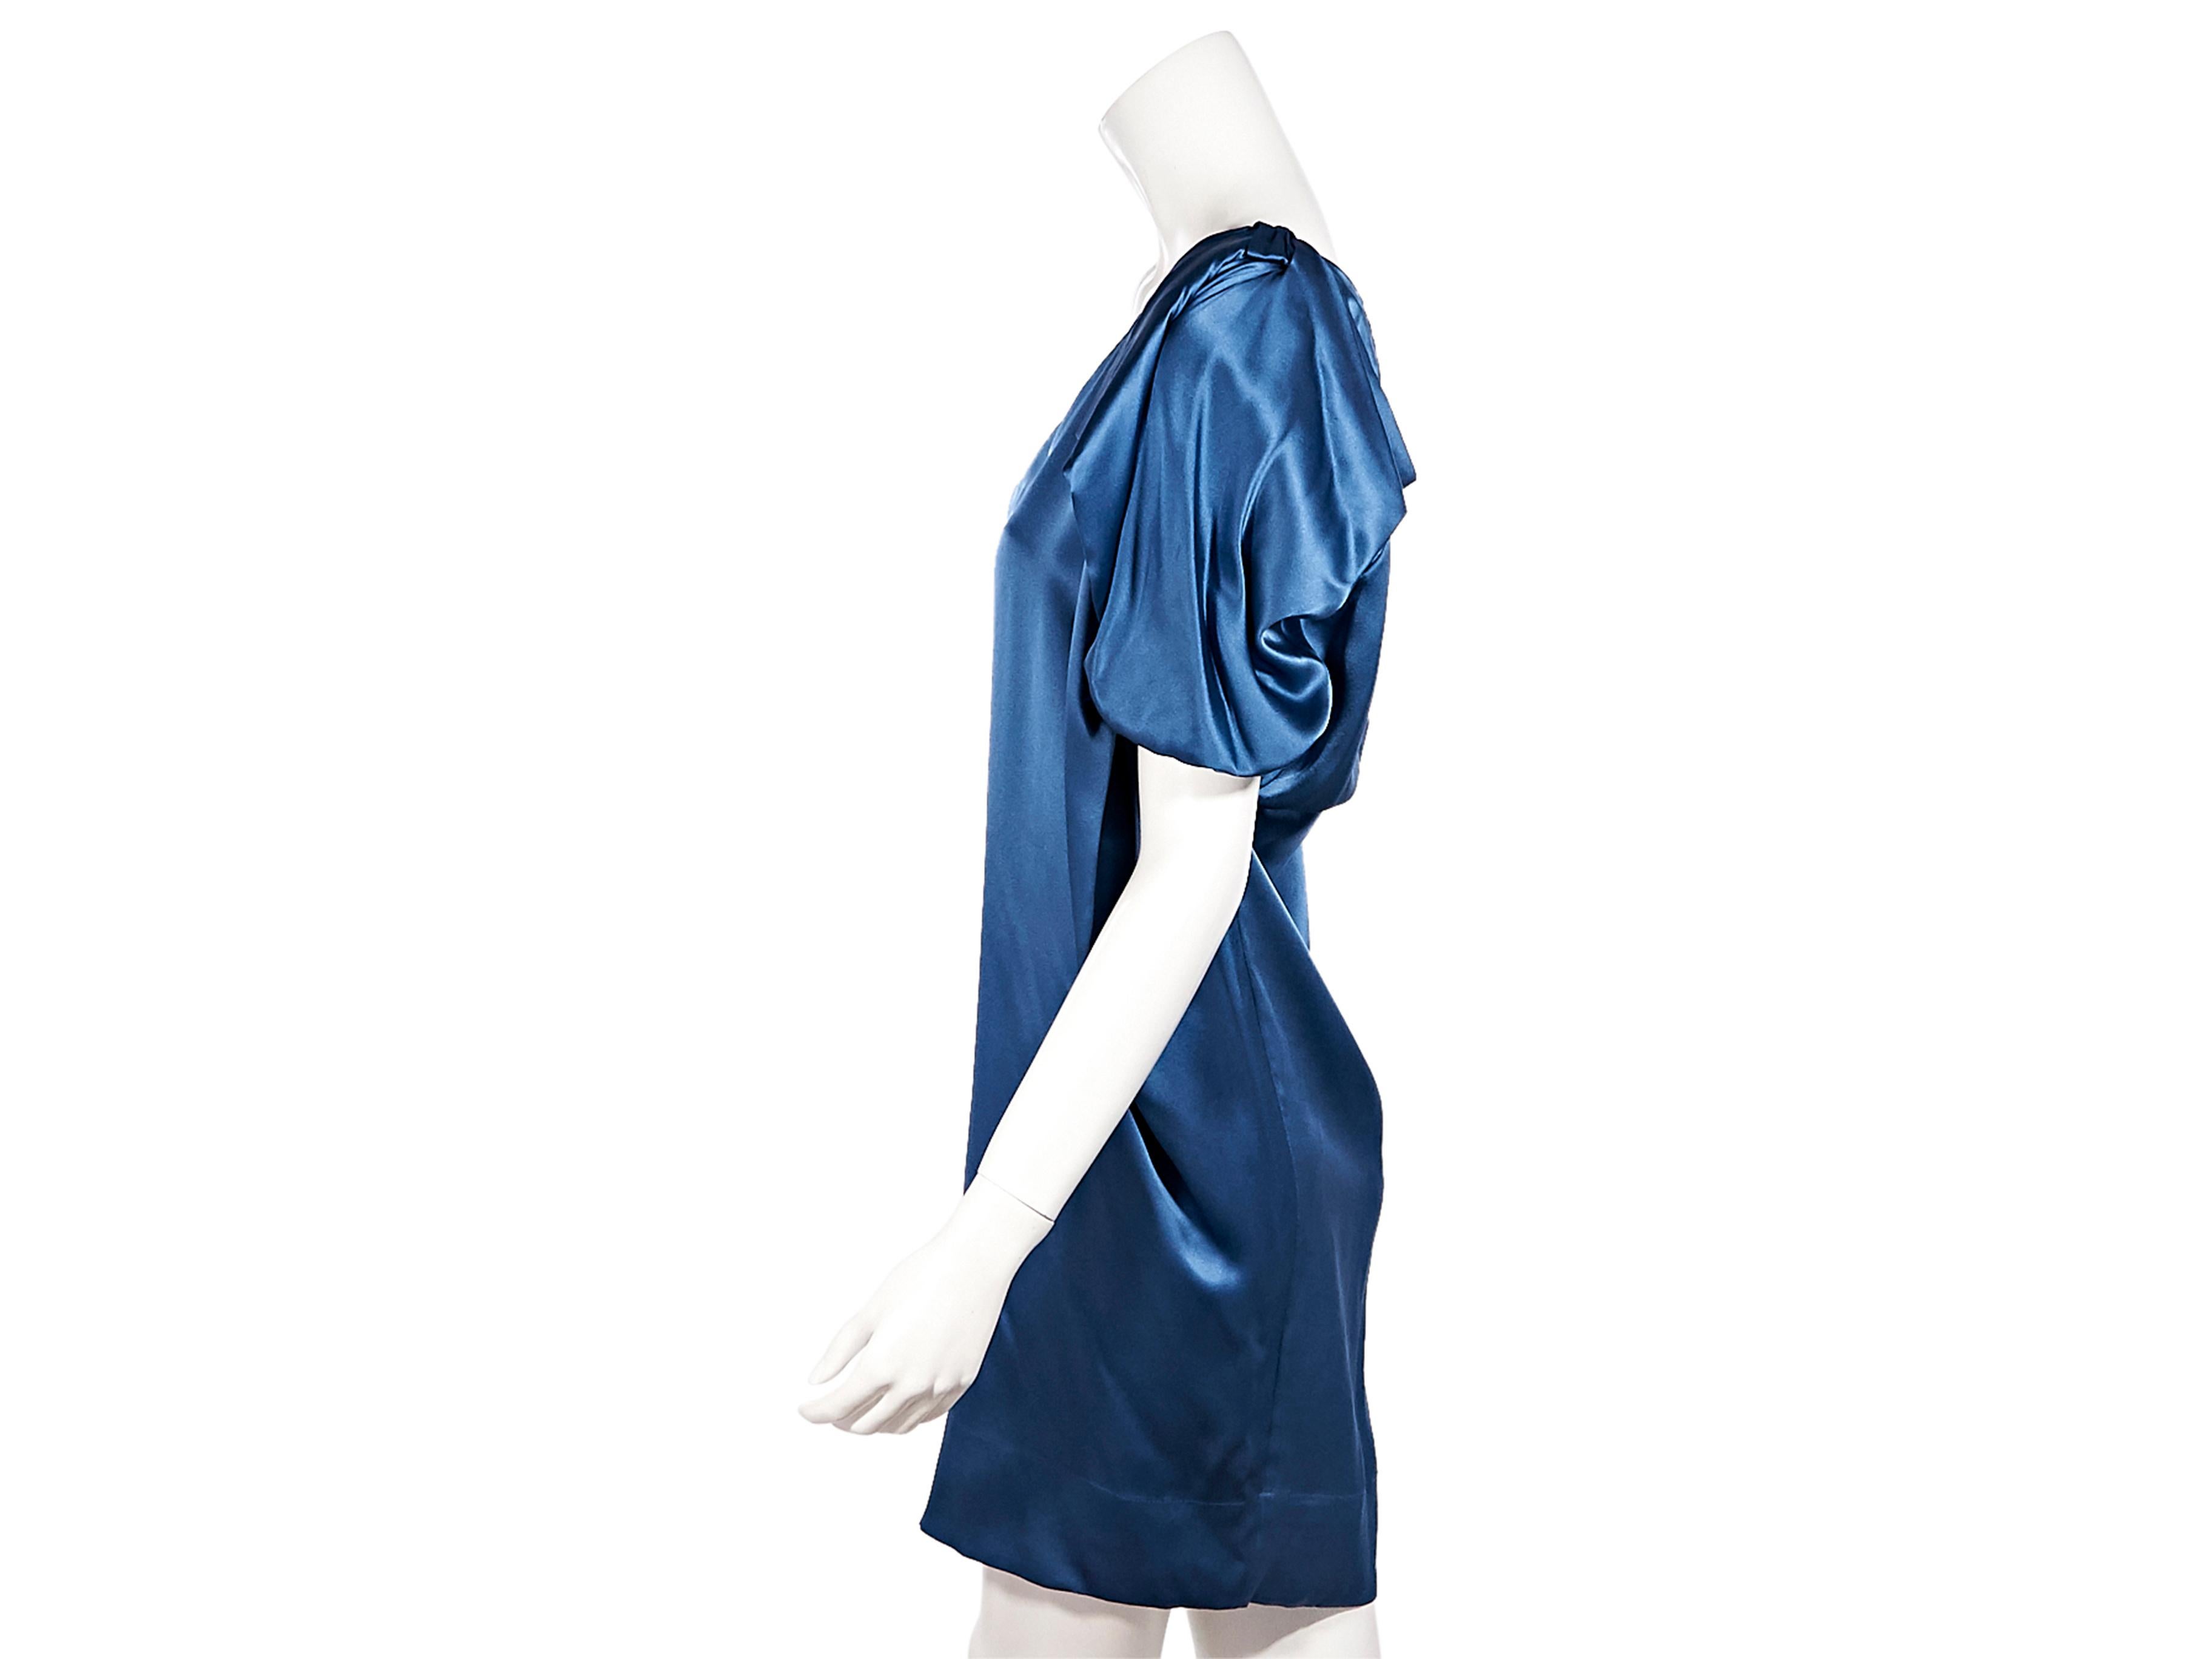 Product details:  Blue silk mini dress by Stella McCartney  Asymmetrical collar.  One-shoulder. Draped-detail at shoulder. Single blouson short sleeve.  Concealed zip-side closure.   Style with black patent leather pumps. Label size IT 40. 29.5